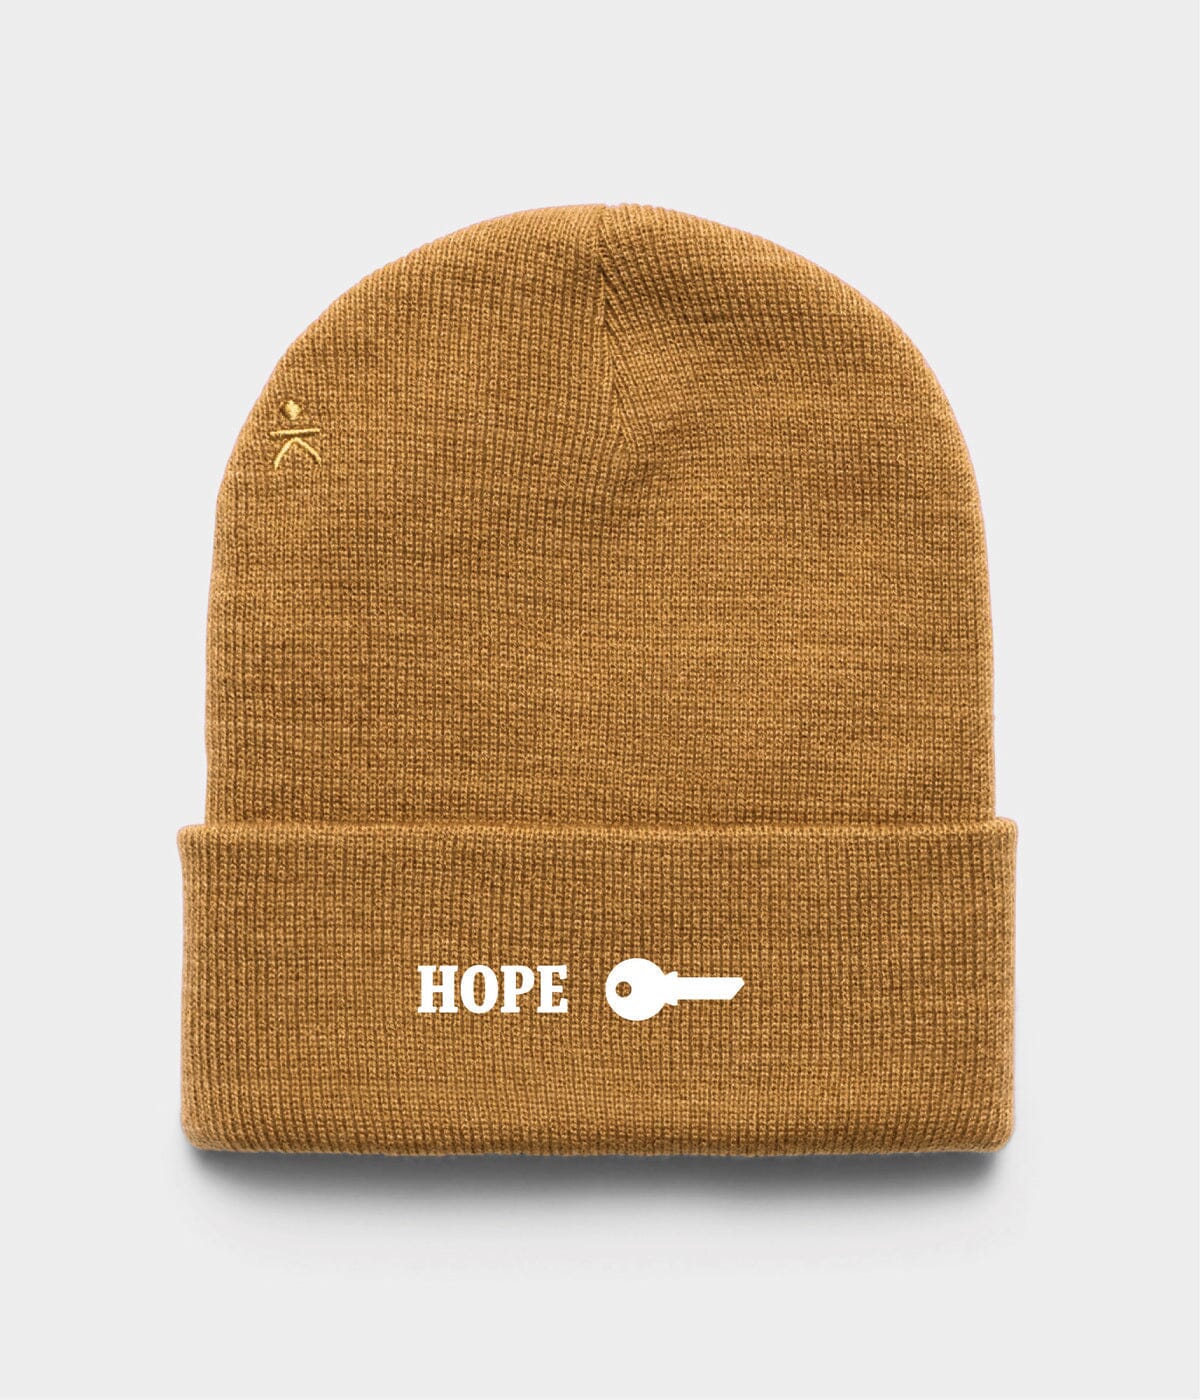 HOPE Beanie by KNOWN SUPPLY + Free HOPE Necklace Bundle The Giving Keys 